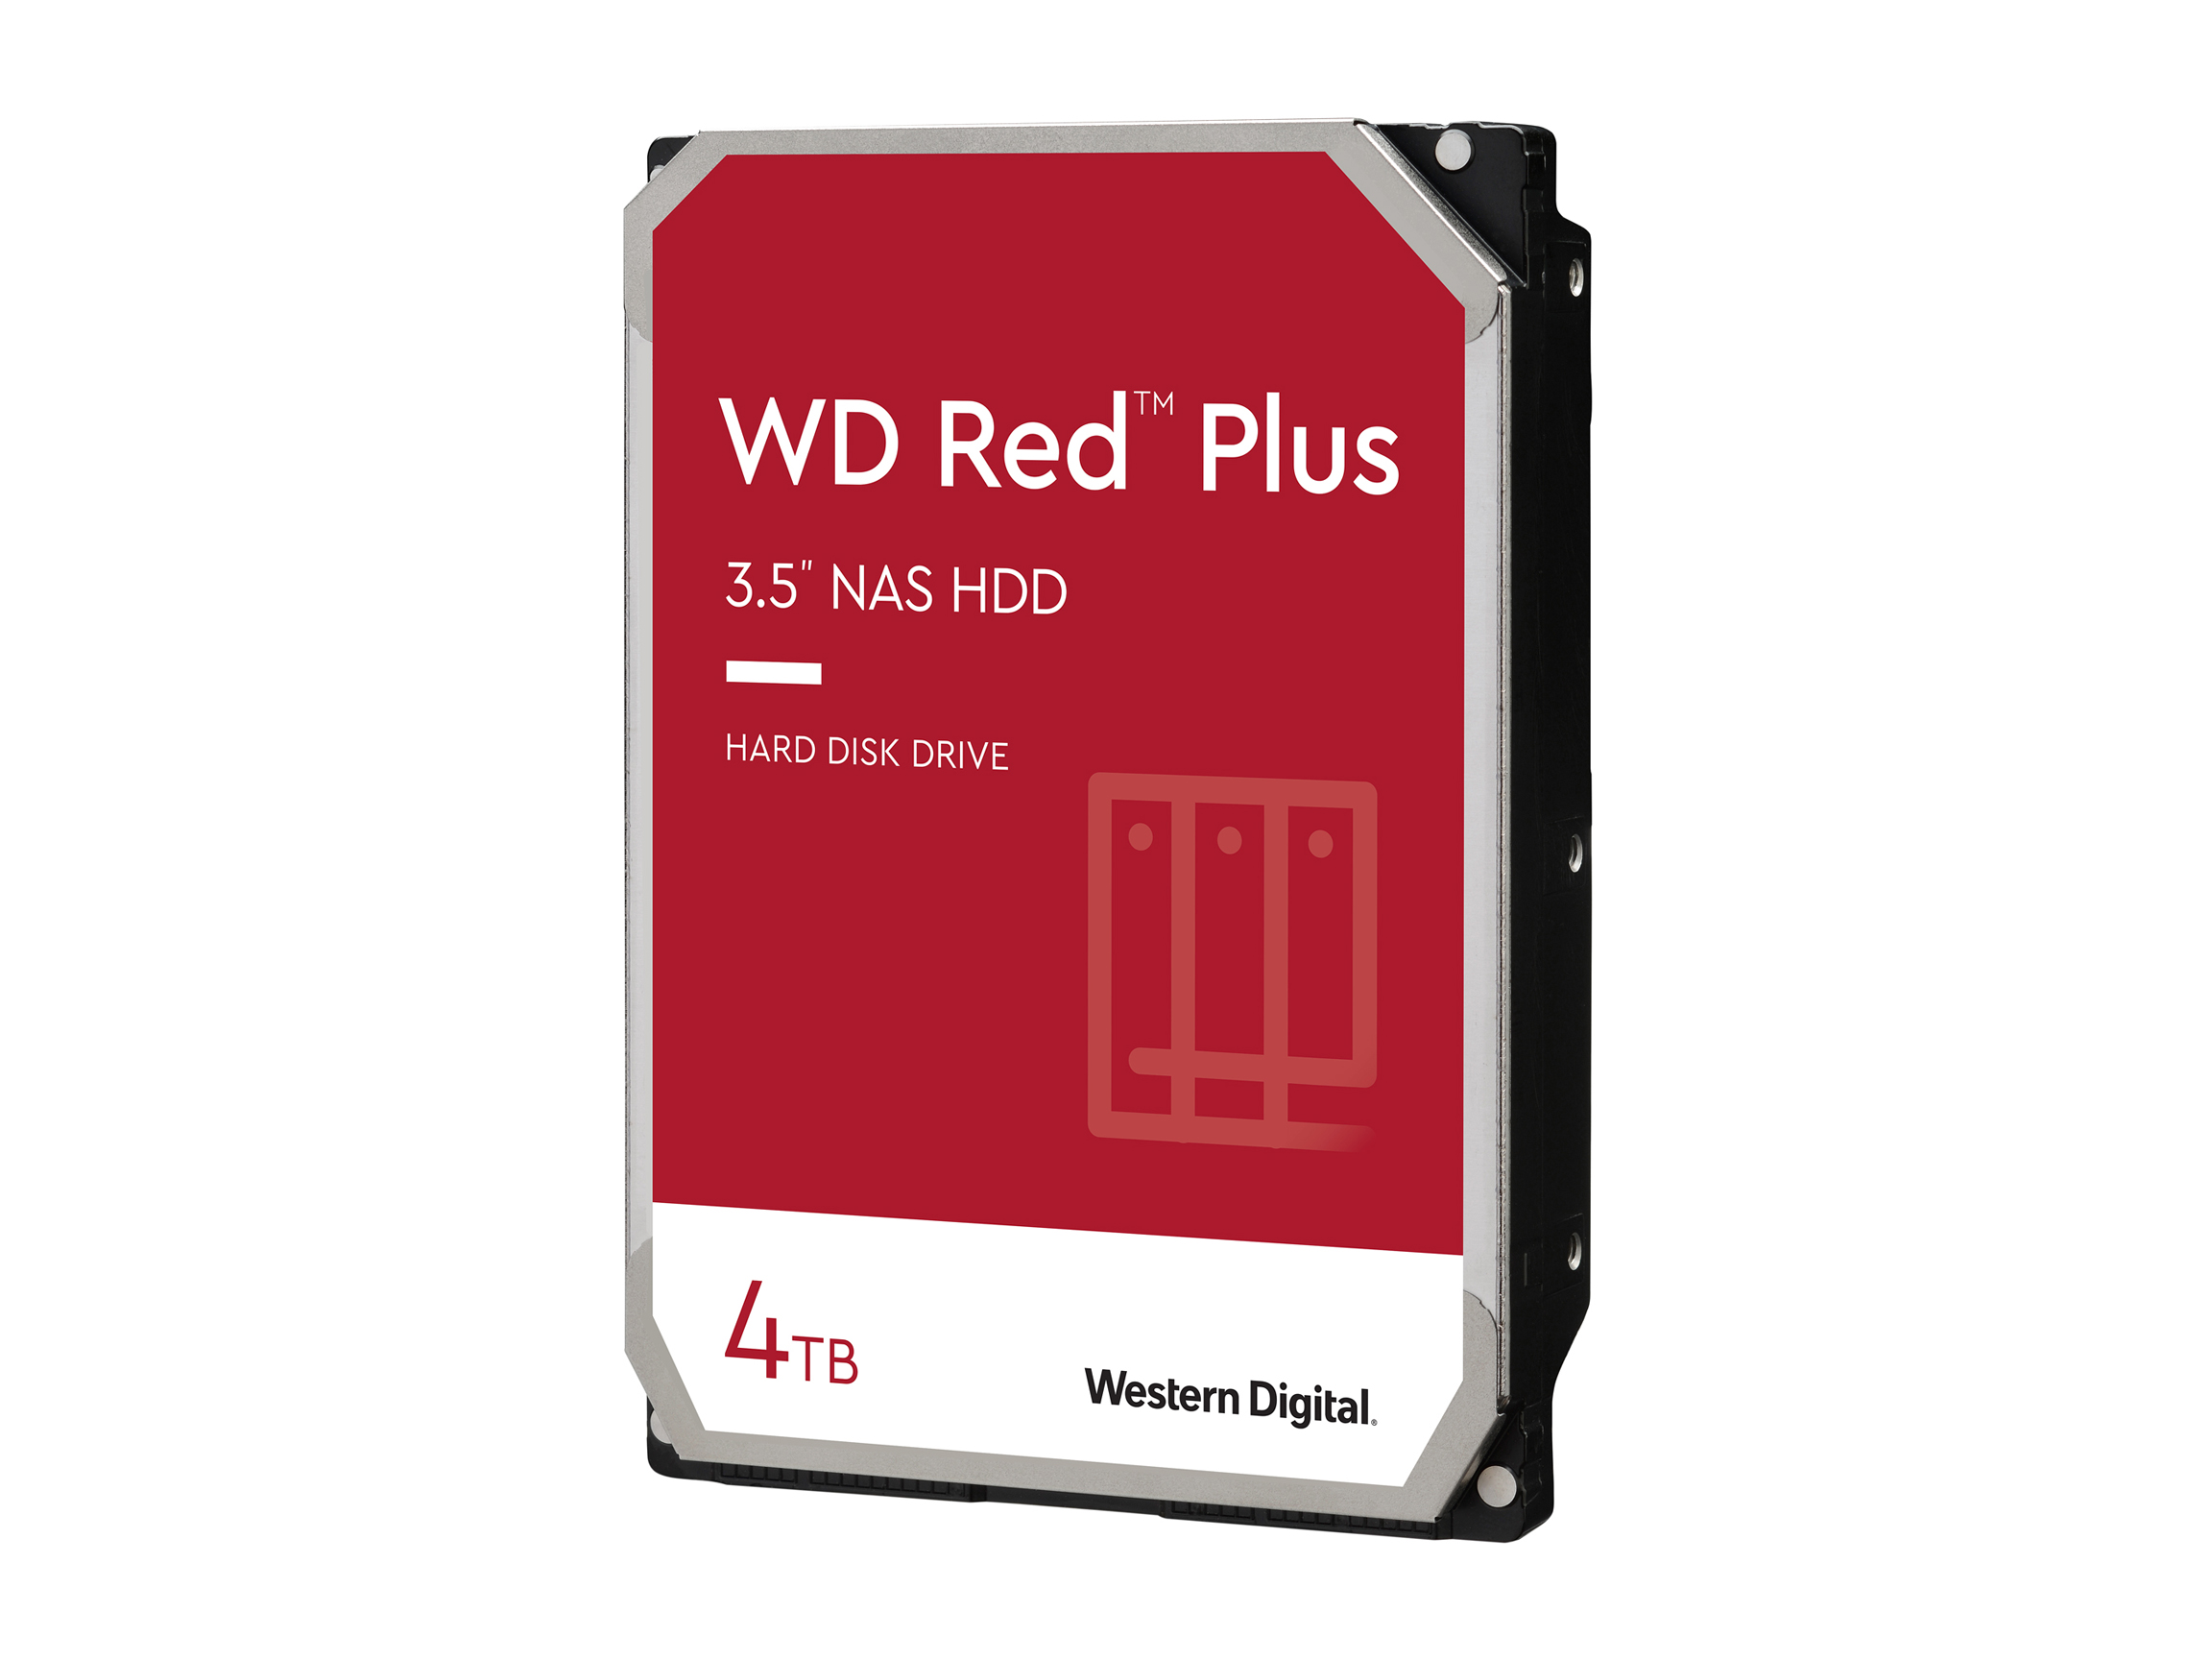 WD Red Plus 4TB NAS Hard Disk Drive $74.99